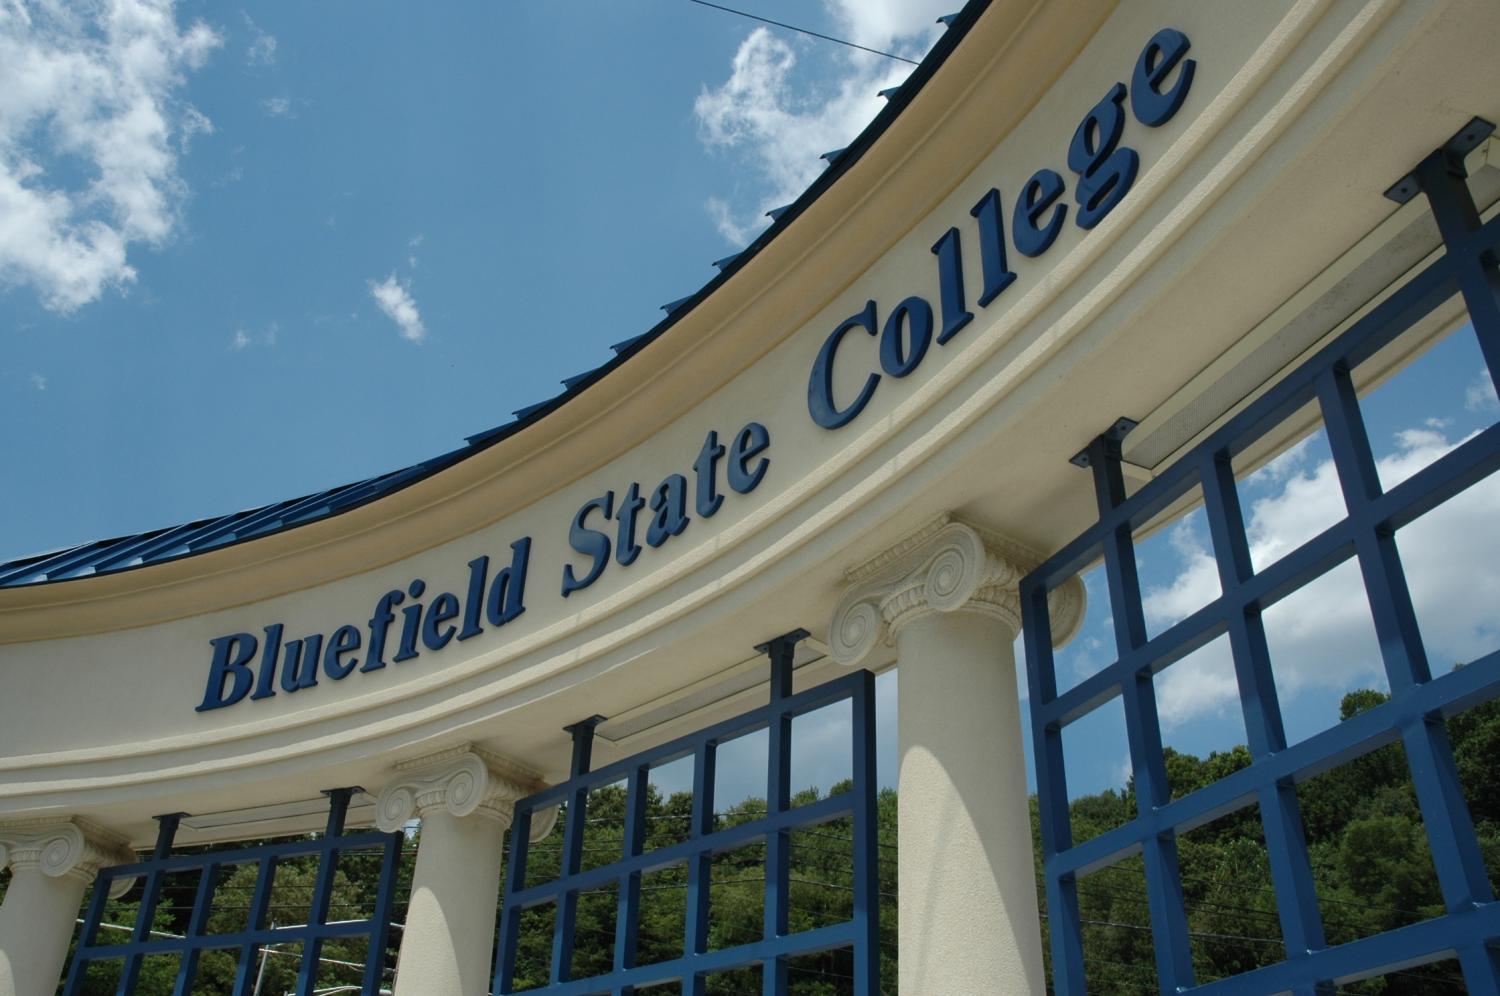 Bluefield State College